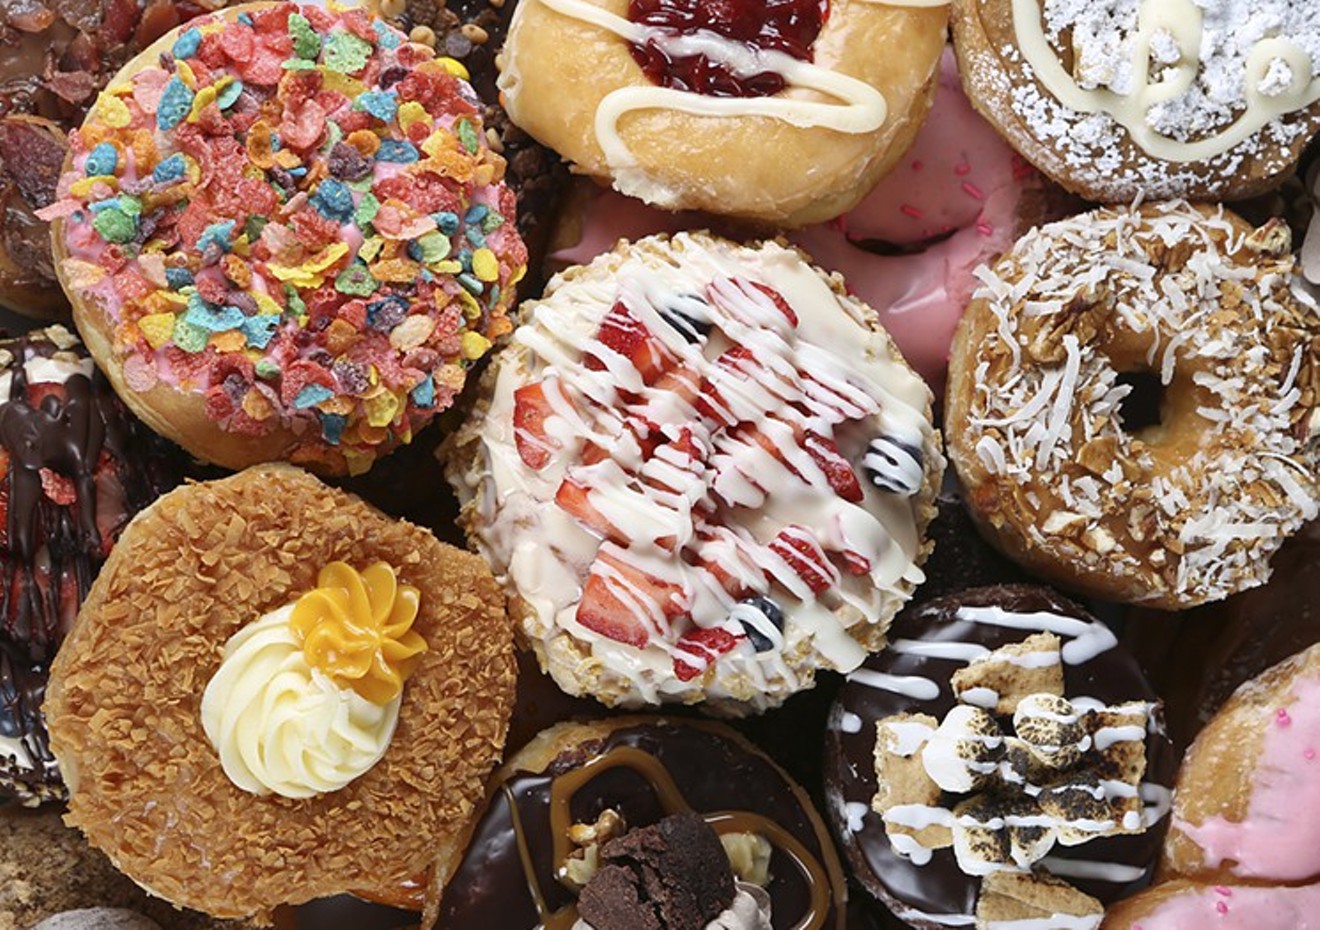 Mojo Donuts will return to Donuts! festival in March.